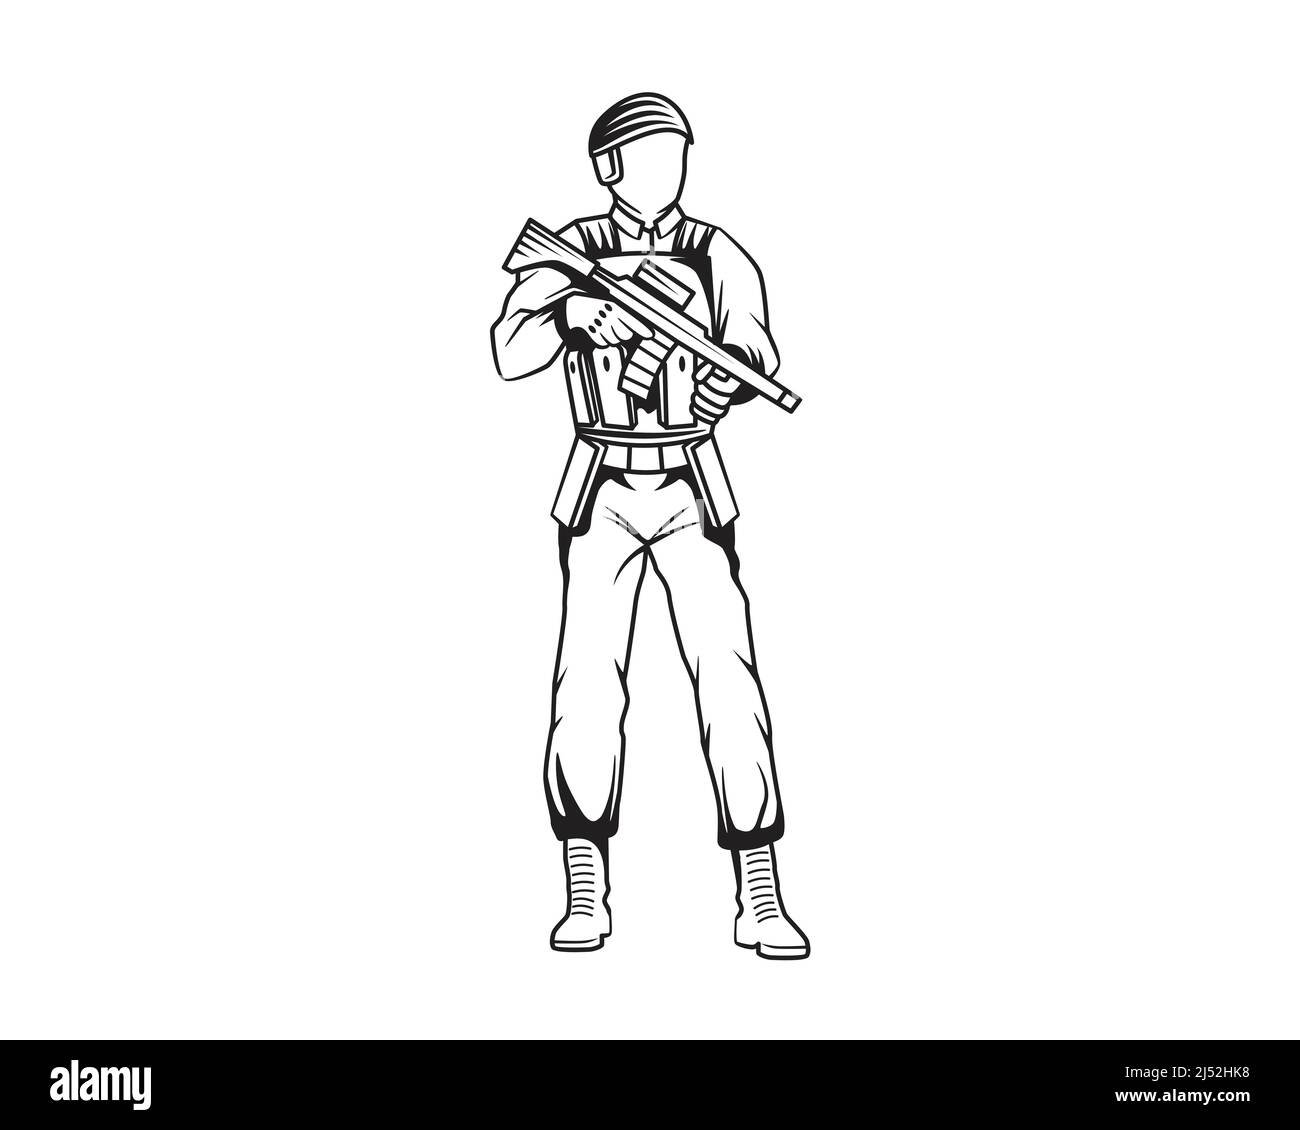 Soldier with Steady Gesture Illustration with Silhouette Style Vector Stock Vector